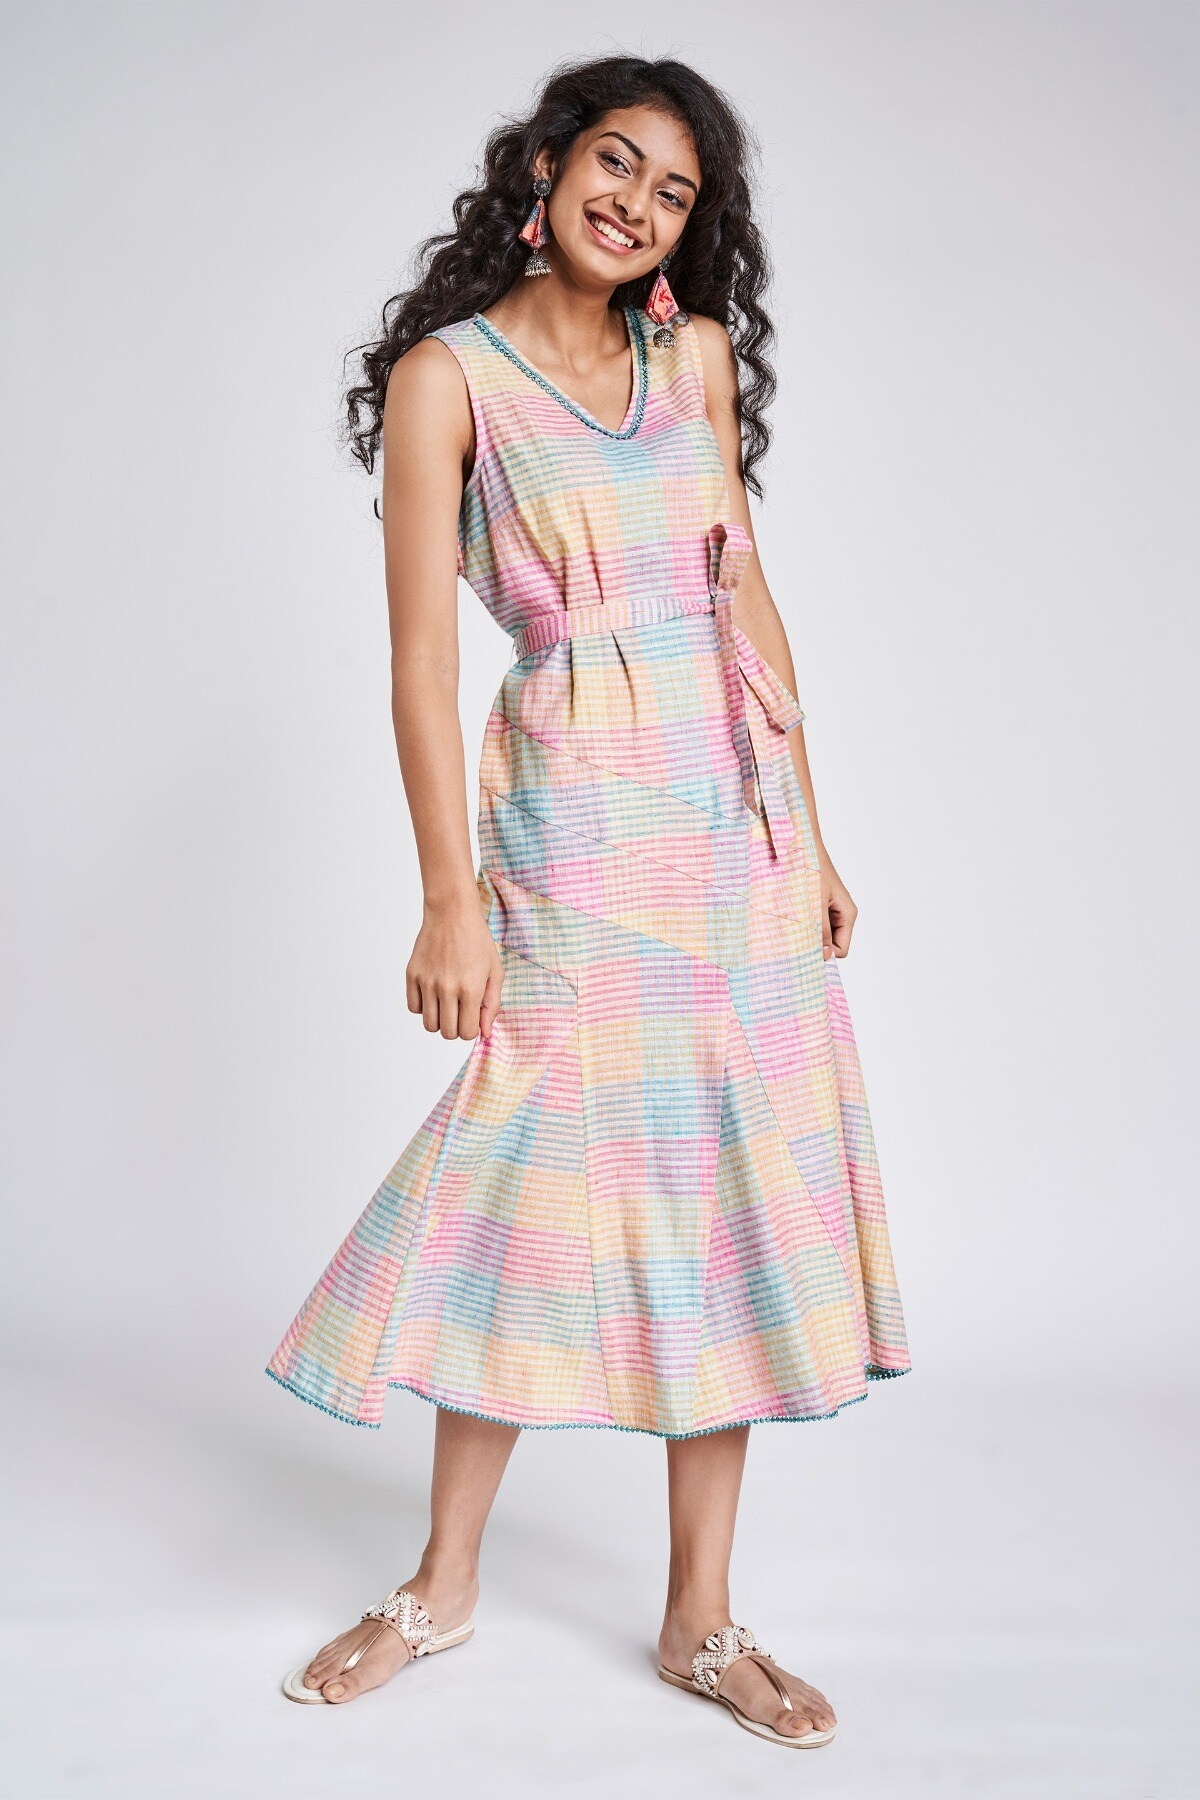 Global Desi | Multi Color Checks Fit And Flare Dress 6